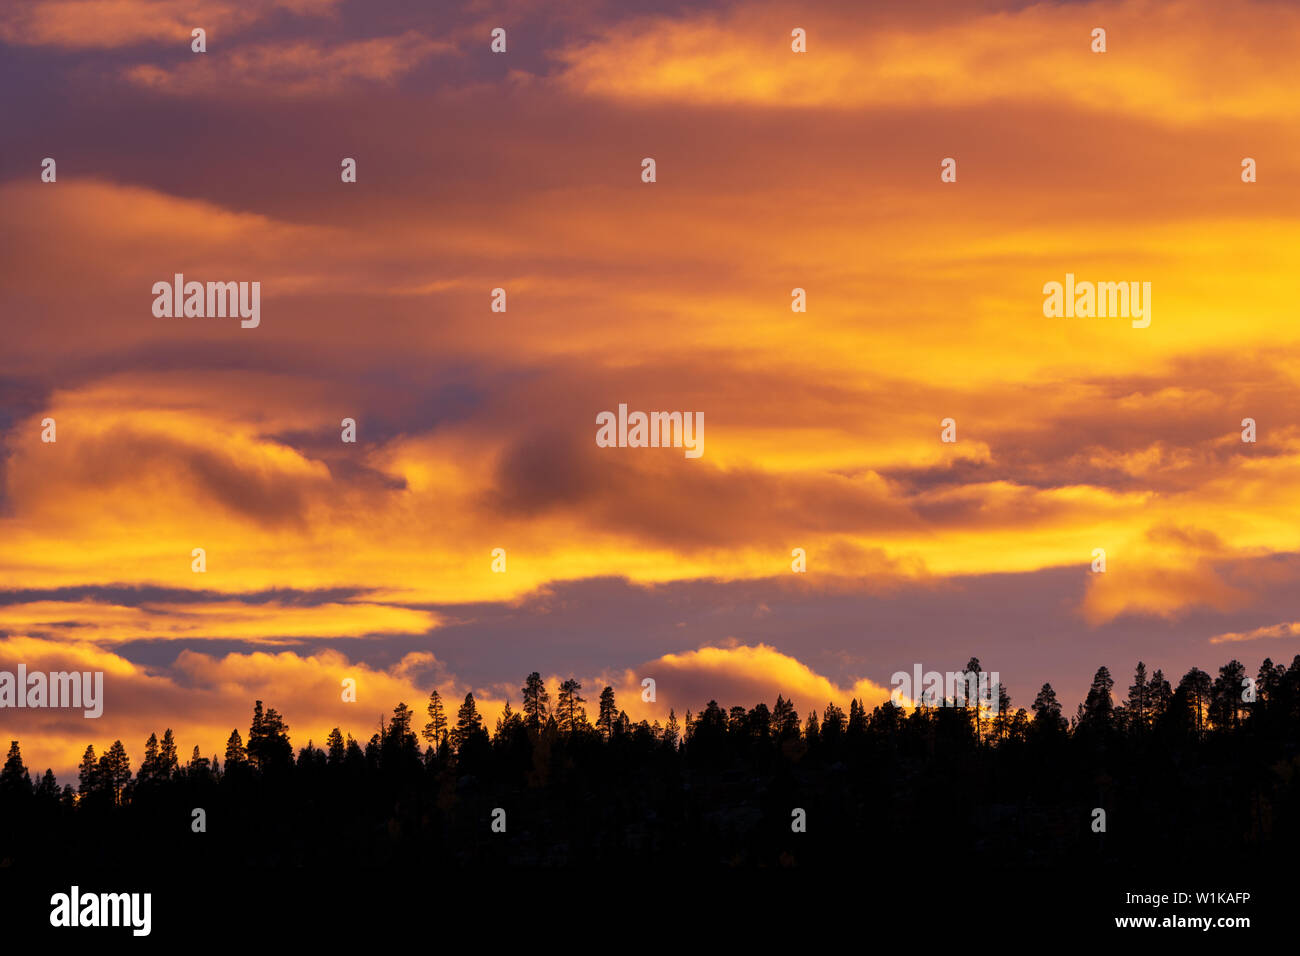 Sunset sky with clouds behind forest silhouette Stock Photo - Alamy